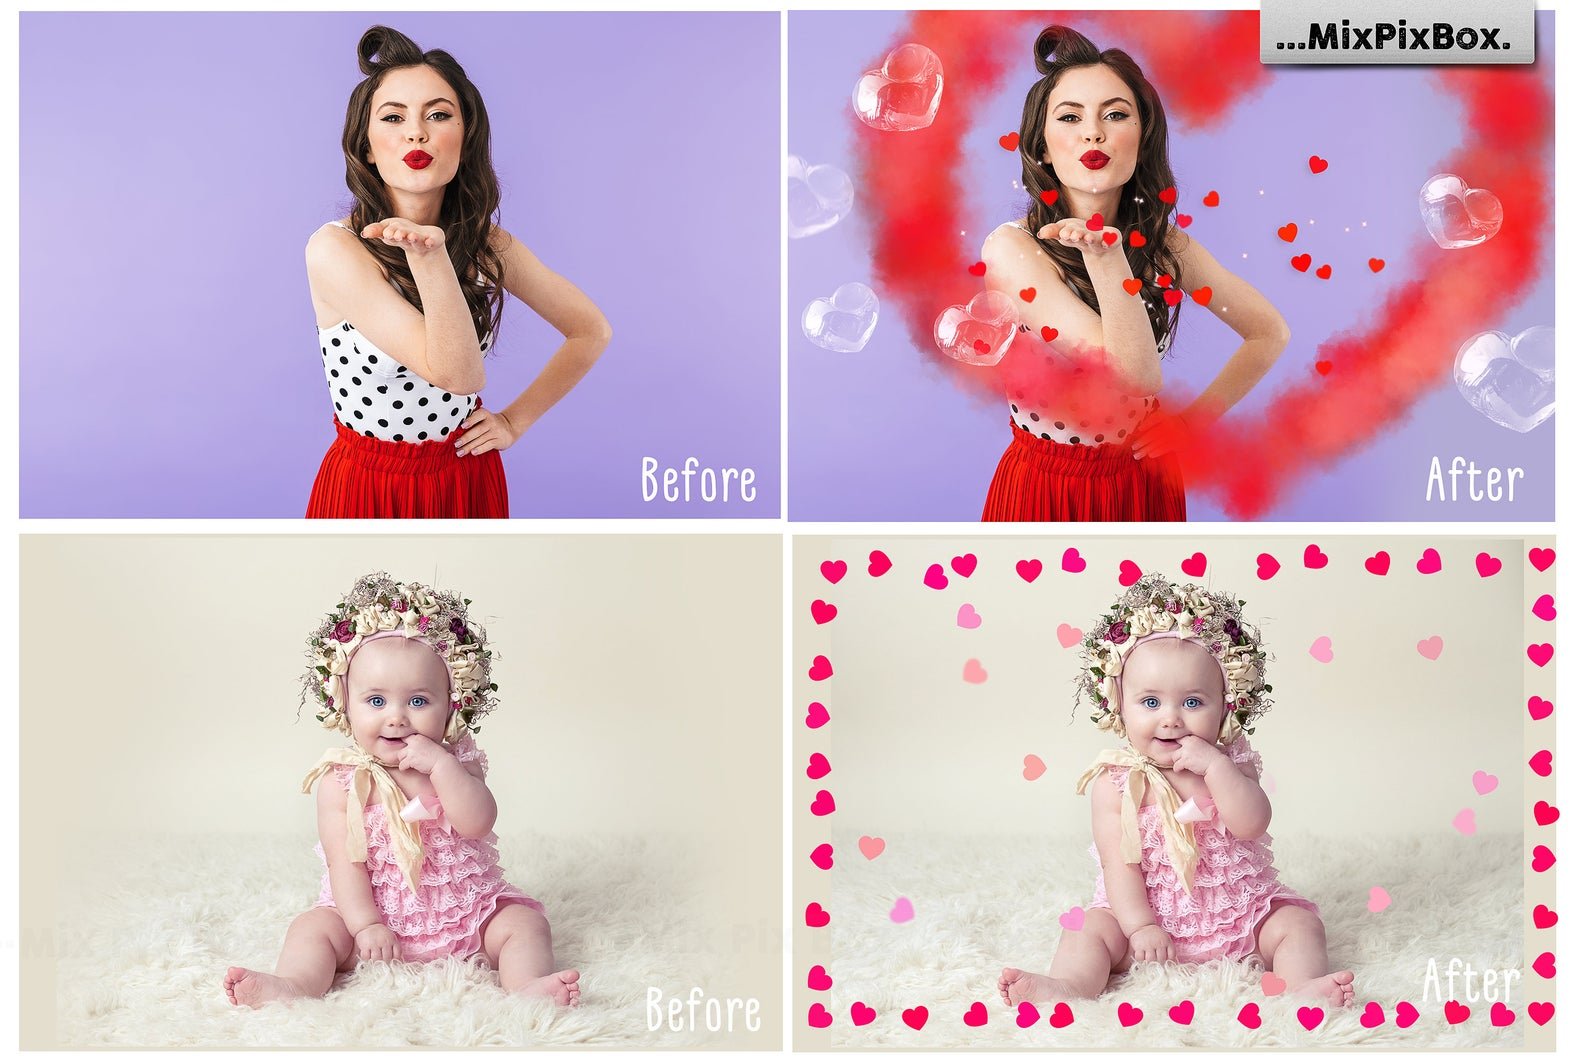 Blowing Kisses Photo Overlays